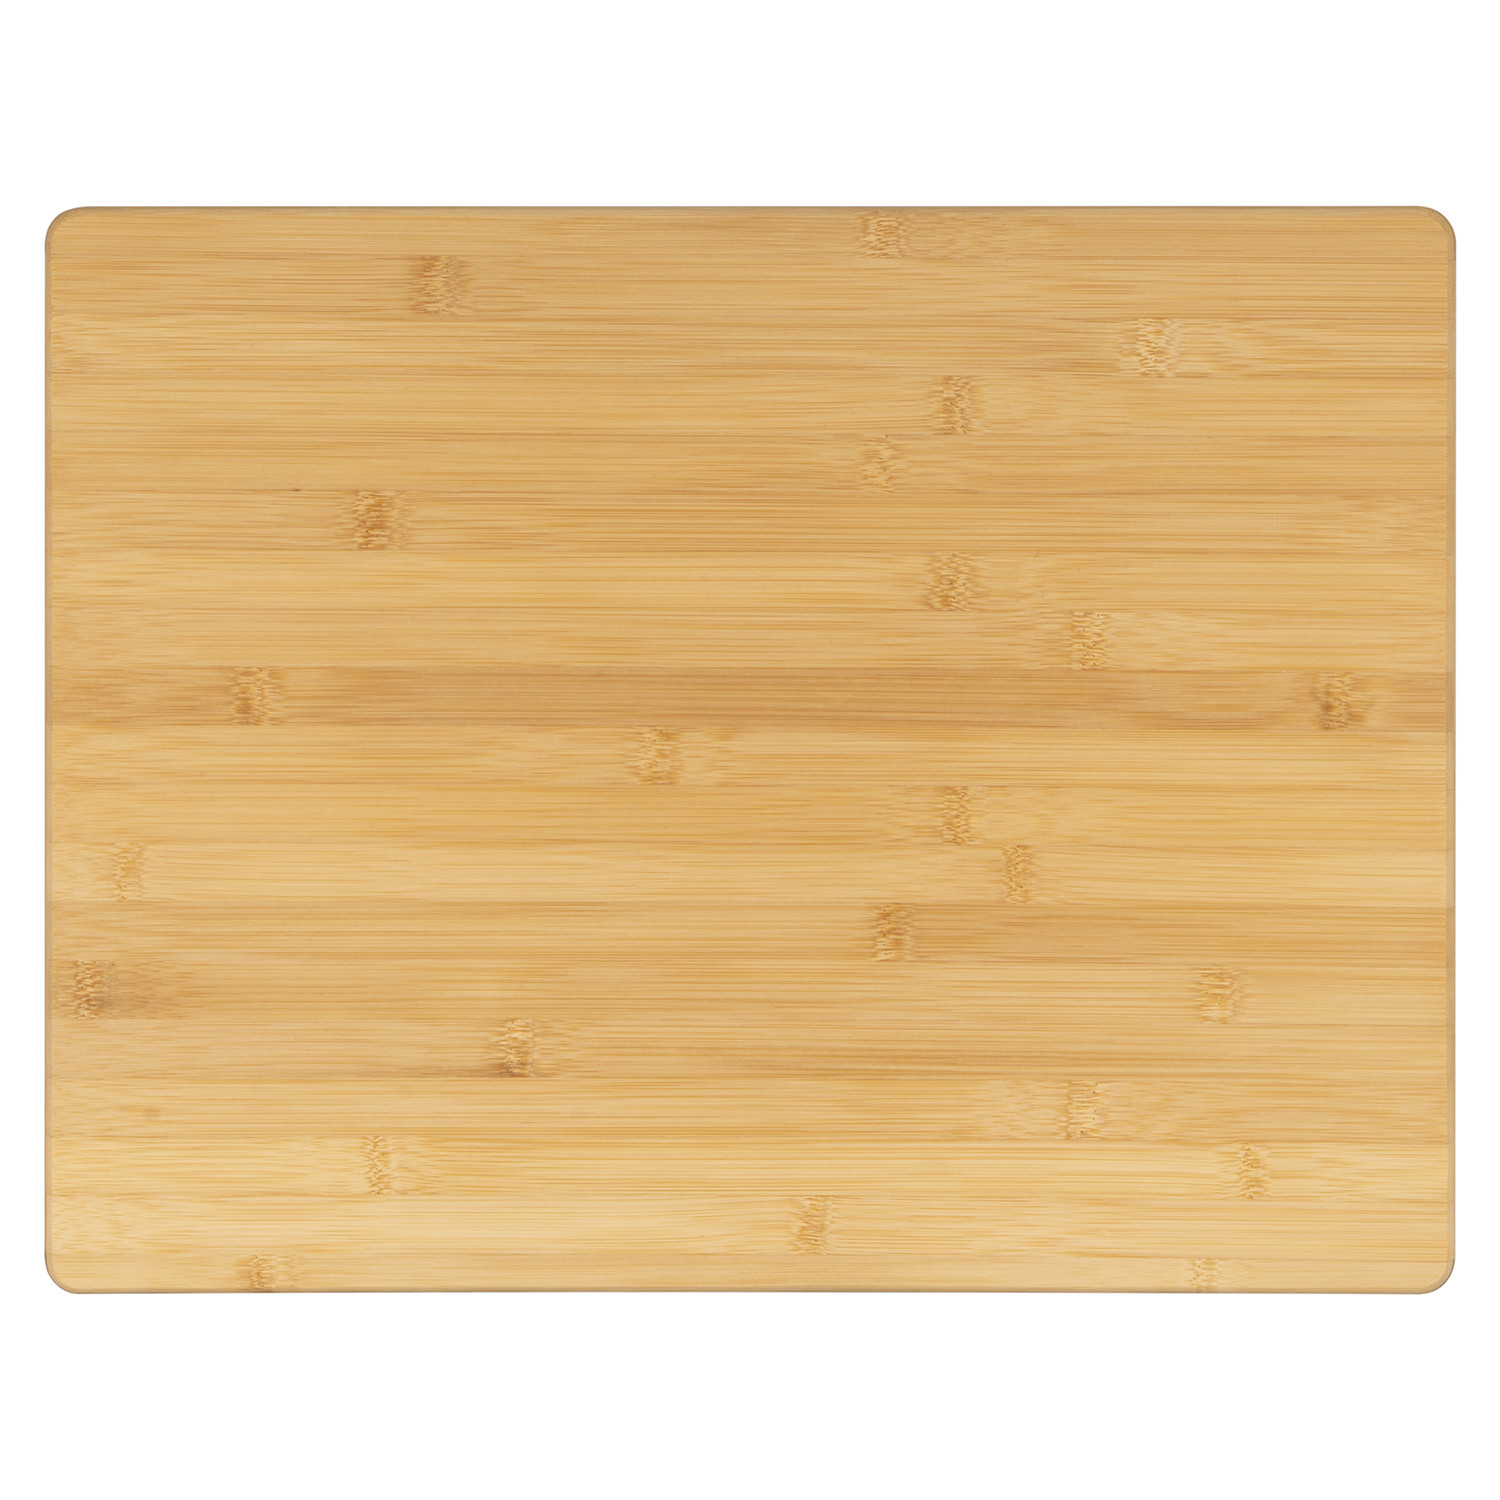 Bamboo Pastry Board Image 1